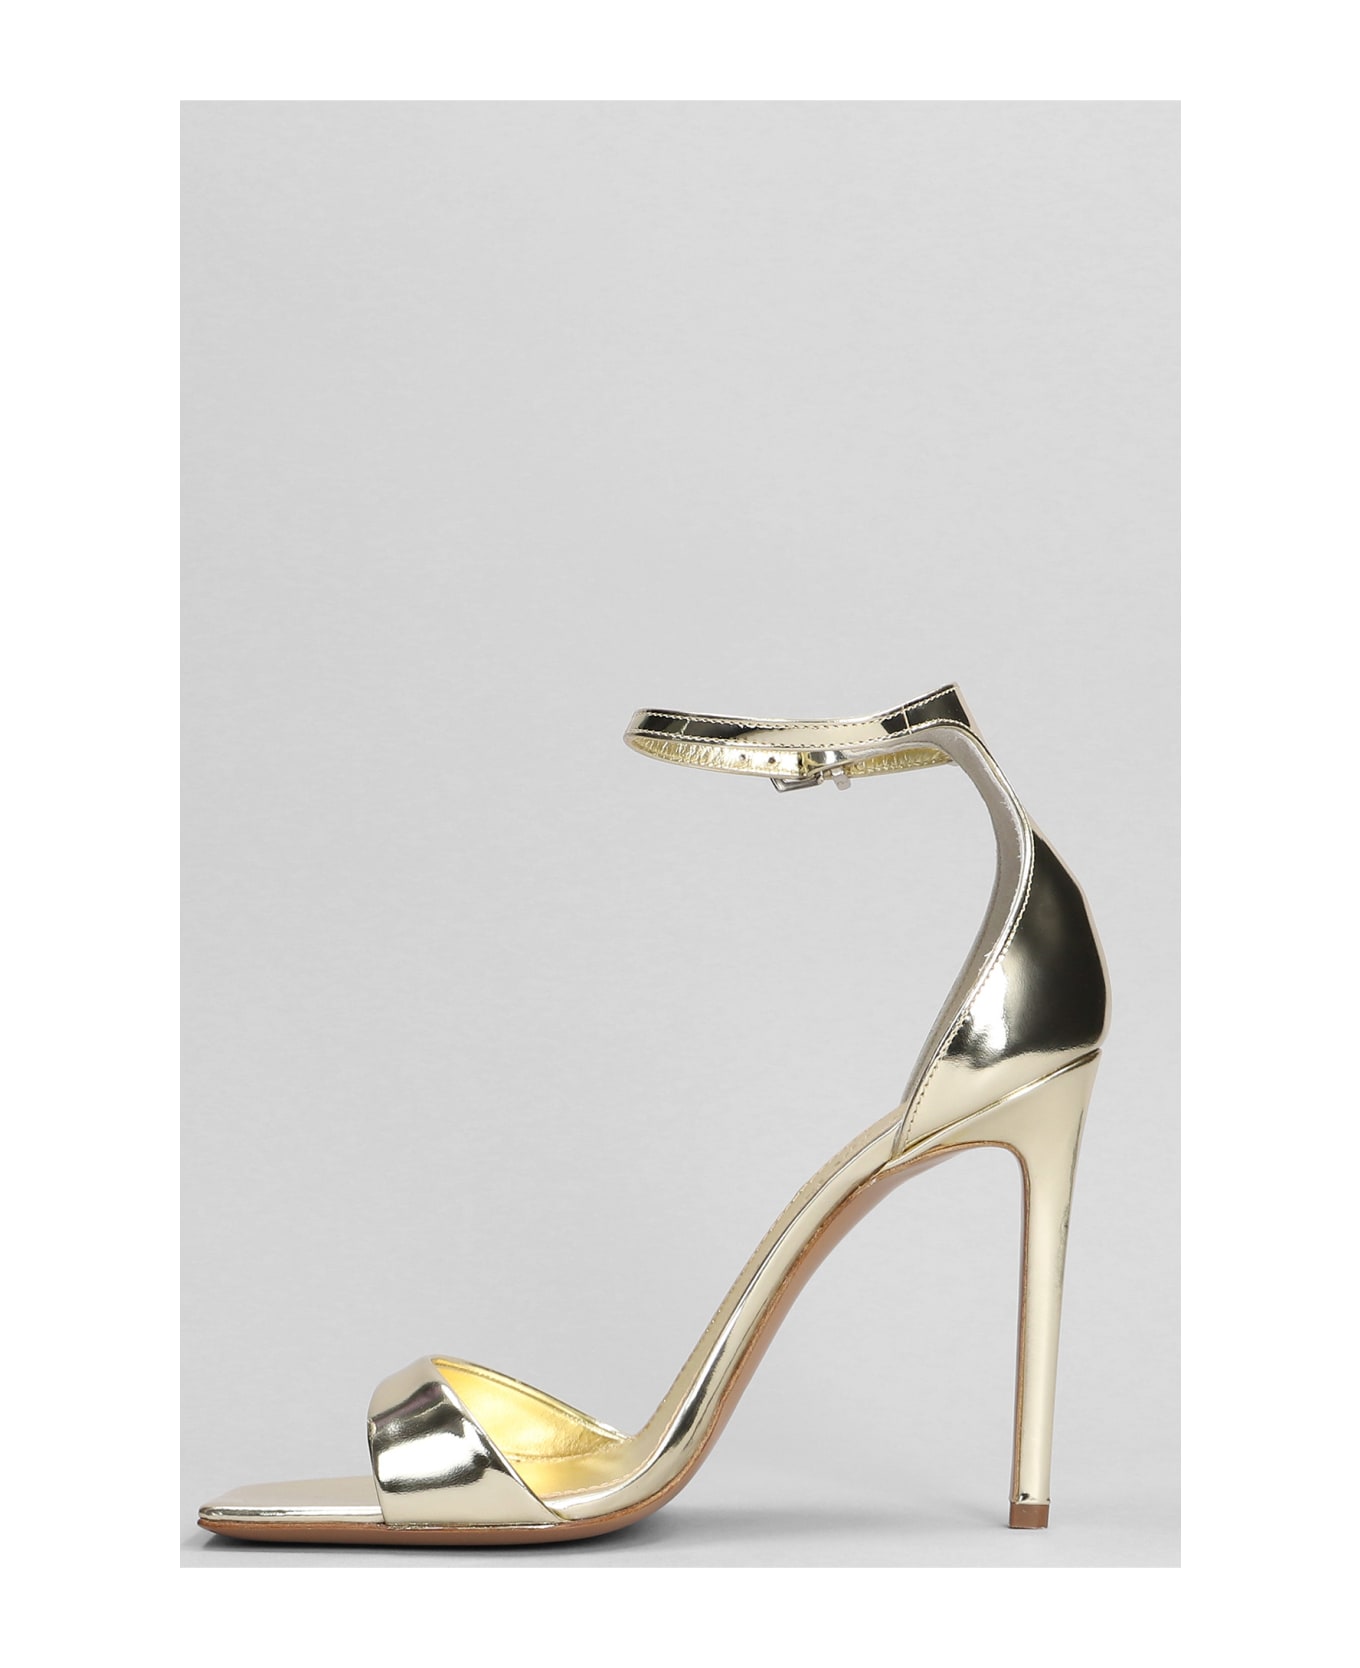 Paris Texas Sandals In Gold Leather - gold